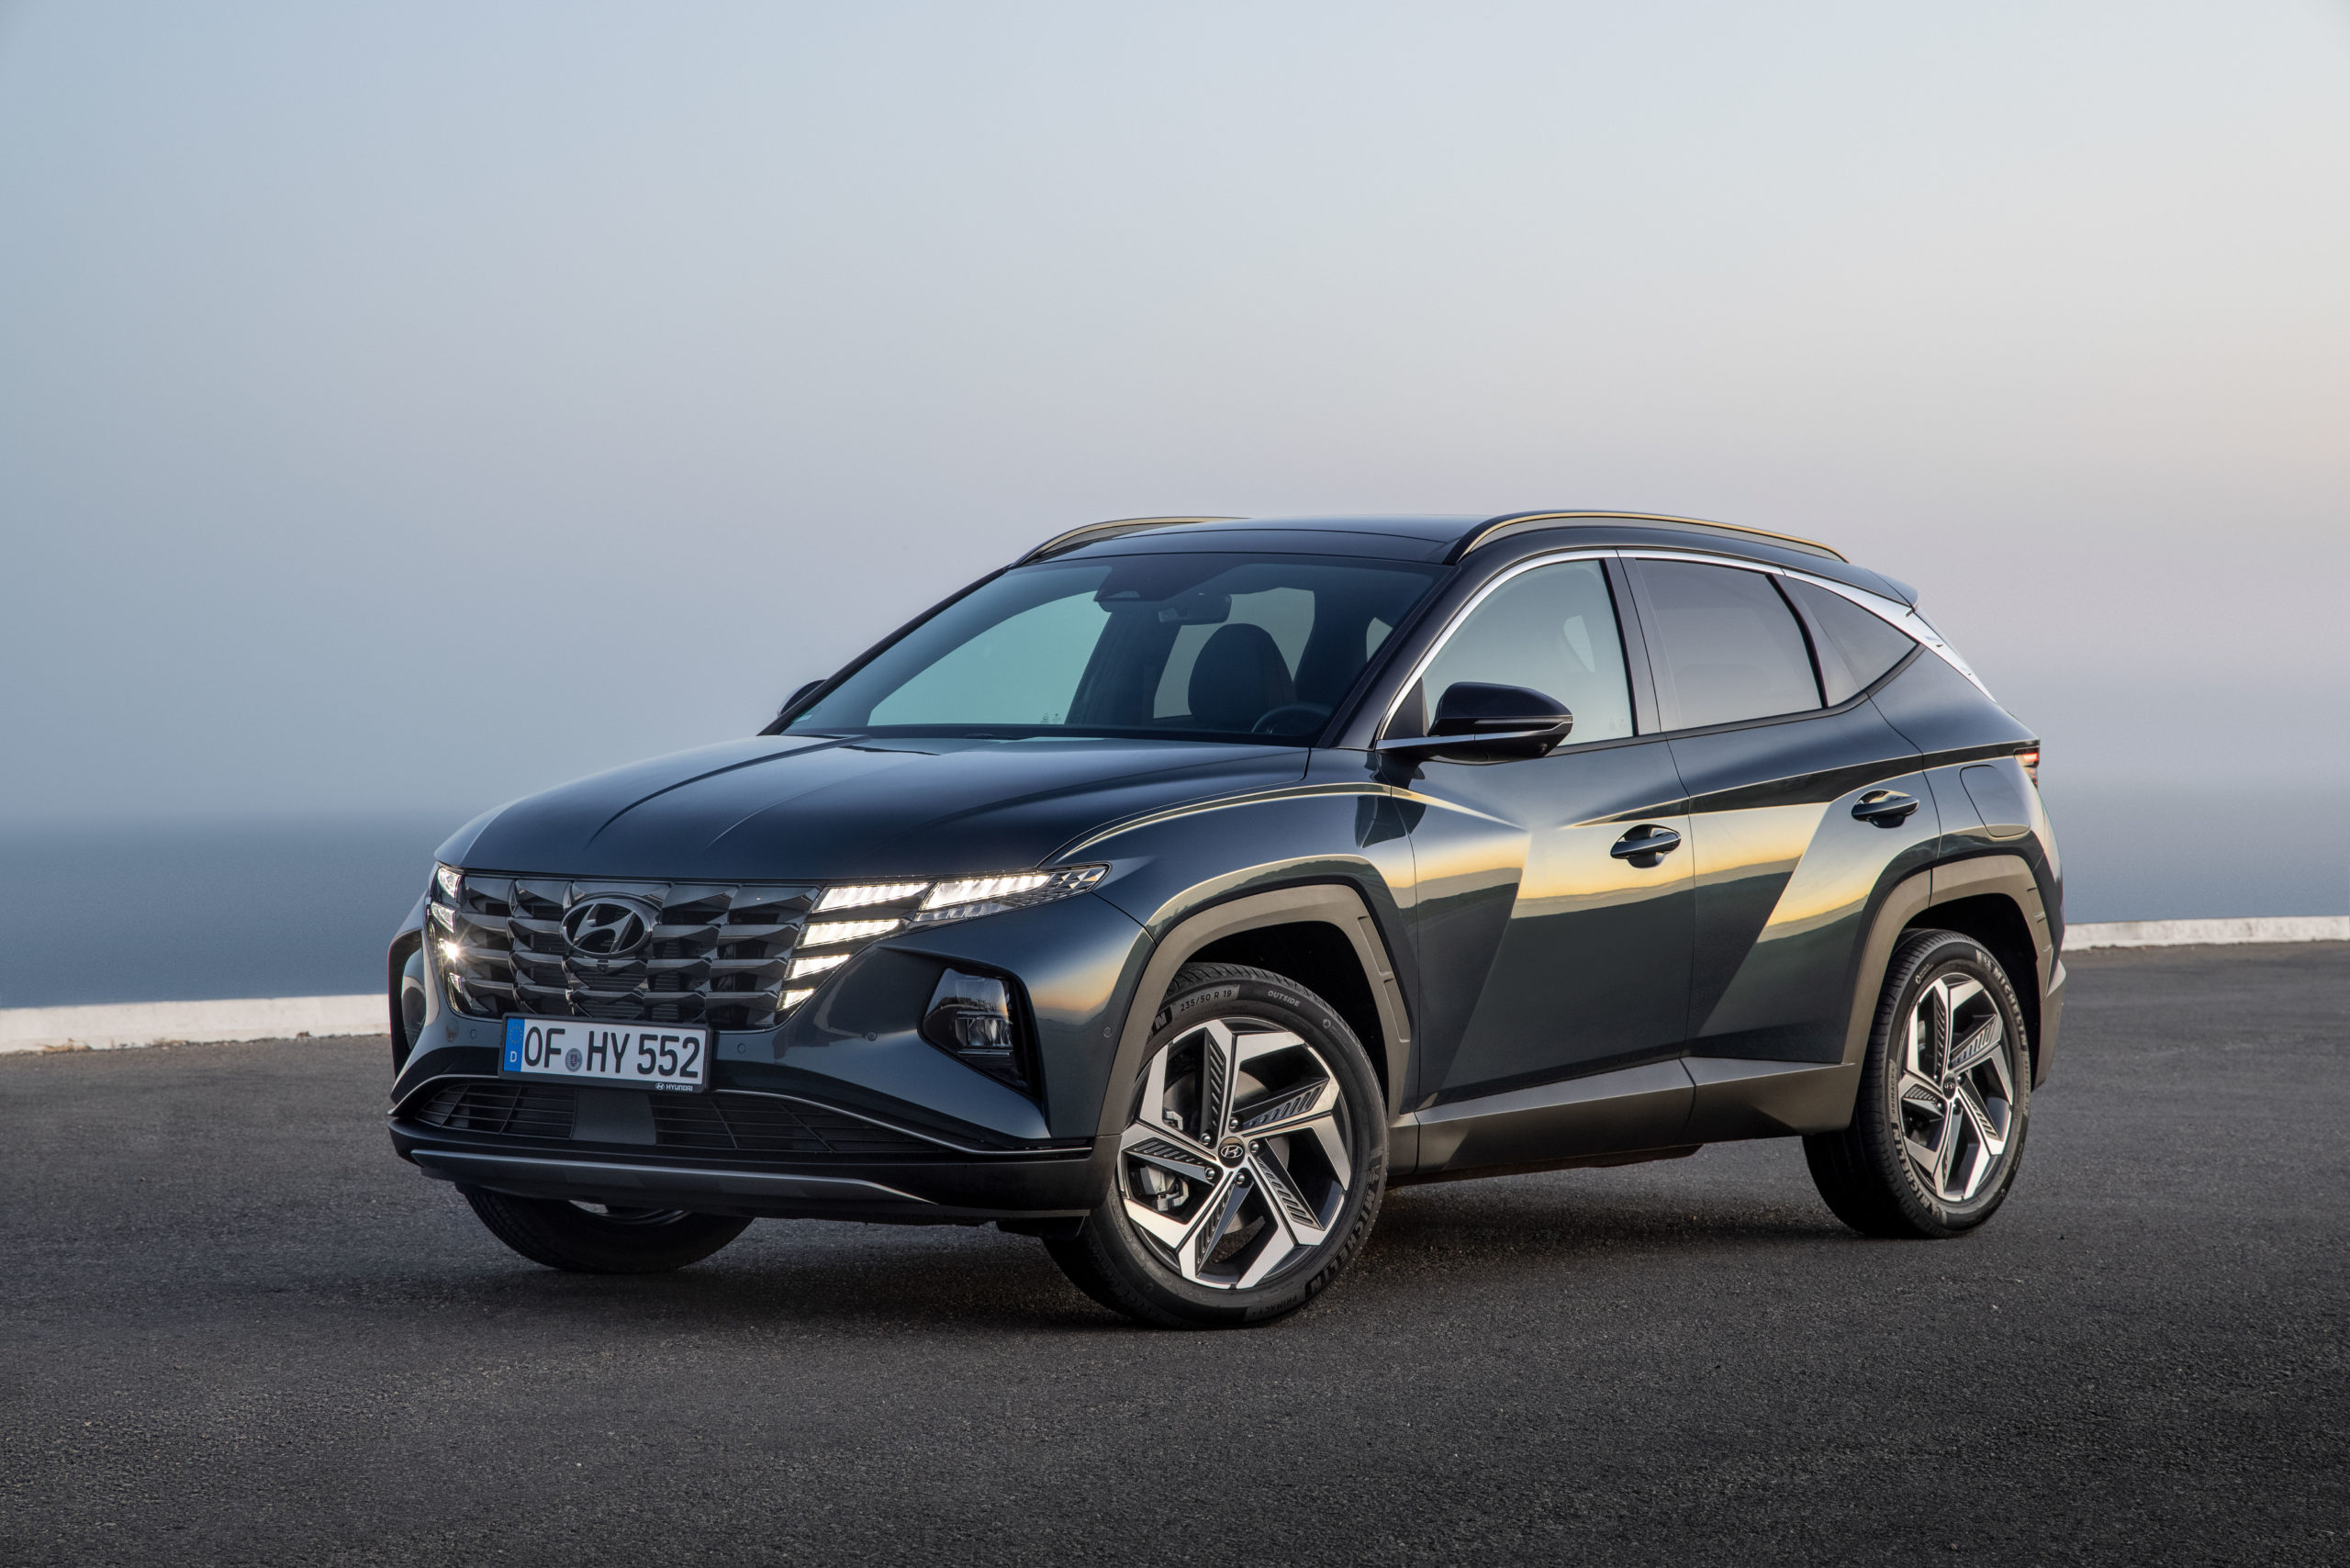 2023 Hyundai Tucson Makes Debut In India, Price Starts At INR 27.7 Lakh  Onwards - The Indian Wire